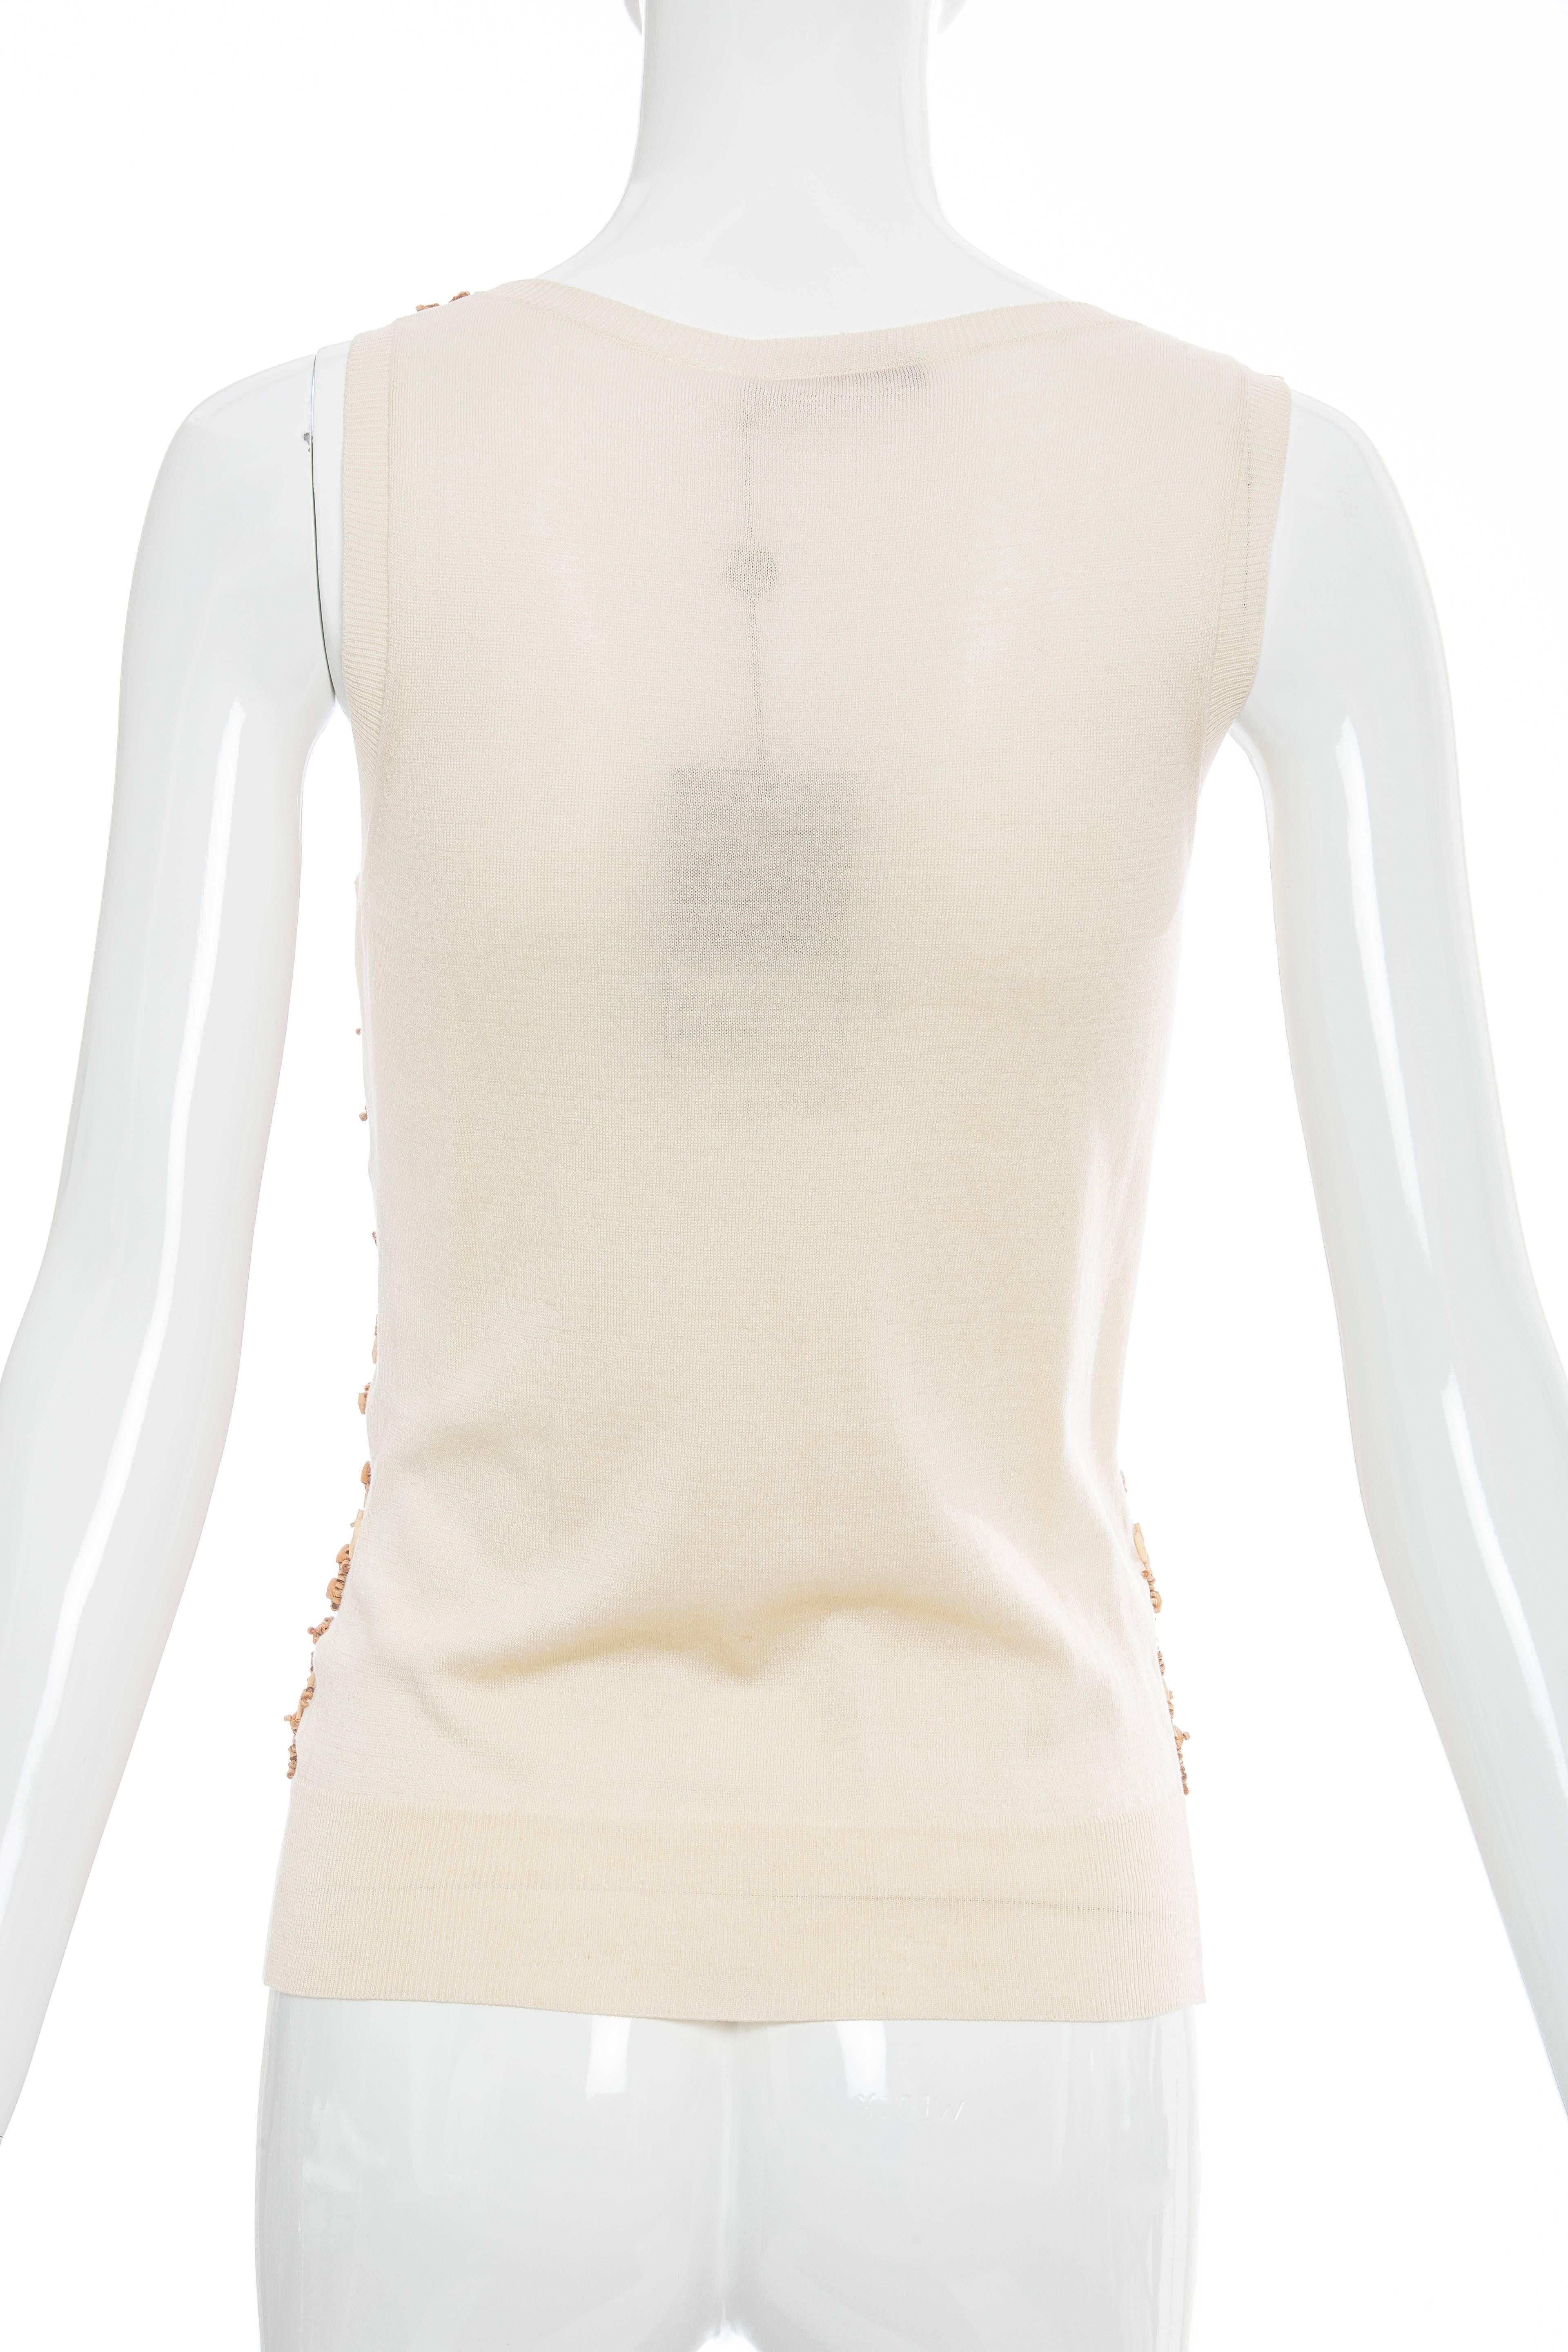 Alexander McQueen Cream Cotton Silk Tank Embroidered Wood Beading, Spring 2006 For Sale 1